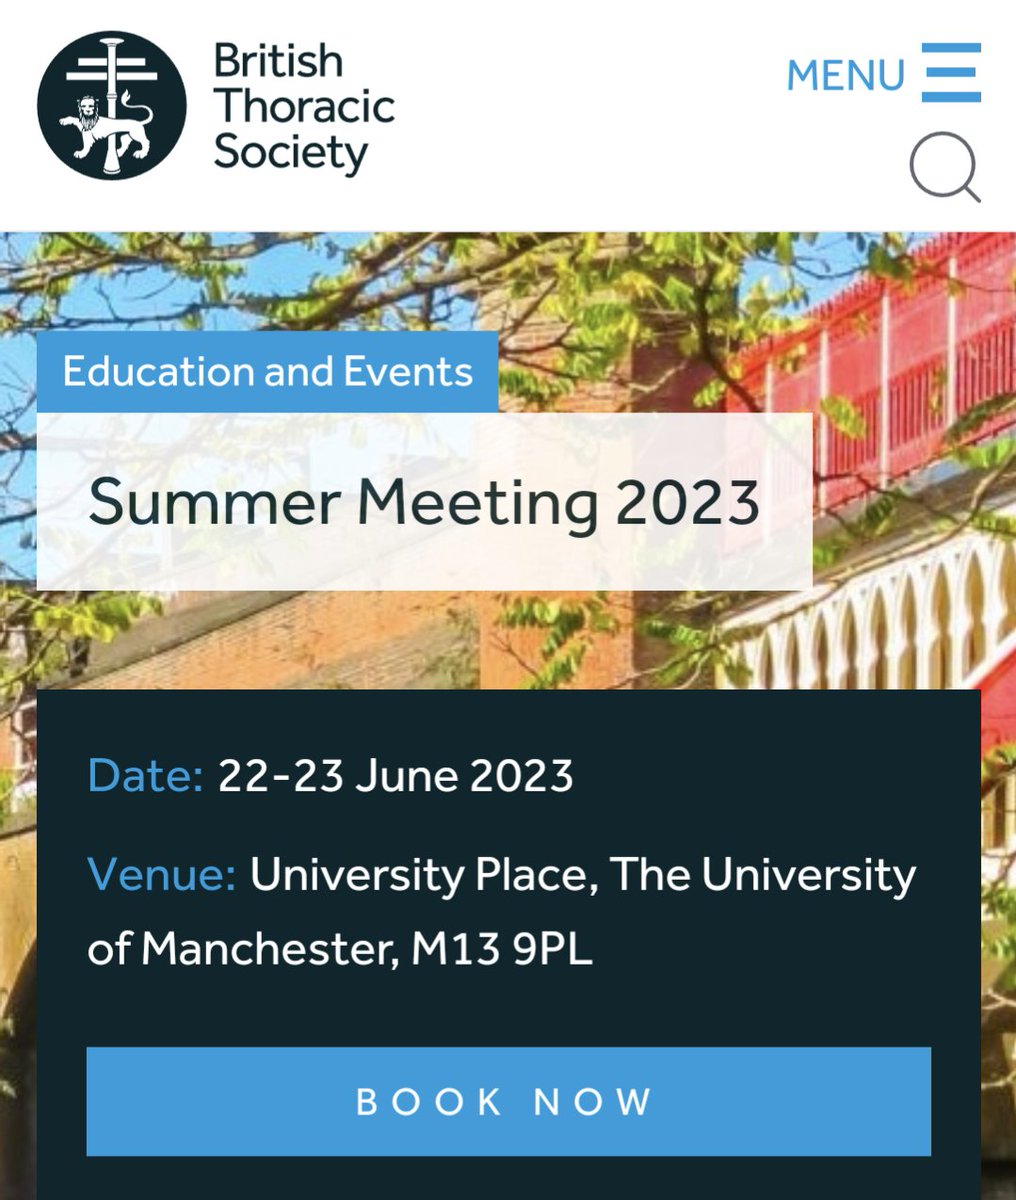 Honoured to be a guest speaker at this year's @BTSrespiratory Summer Meeting

Will NOT be talking inhalers but about human healthcare, plastics and the ocean

Very topical considering the marine heatwaves occurring around the UK #oceandecade @oceansandus @GreenerNHS @DrNickWatts